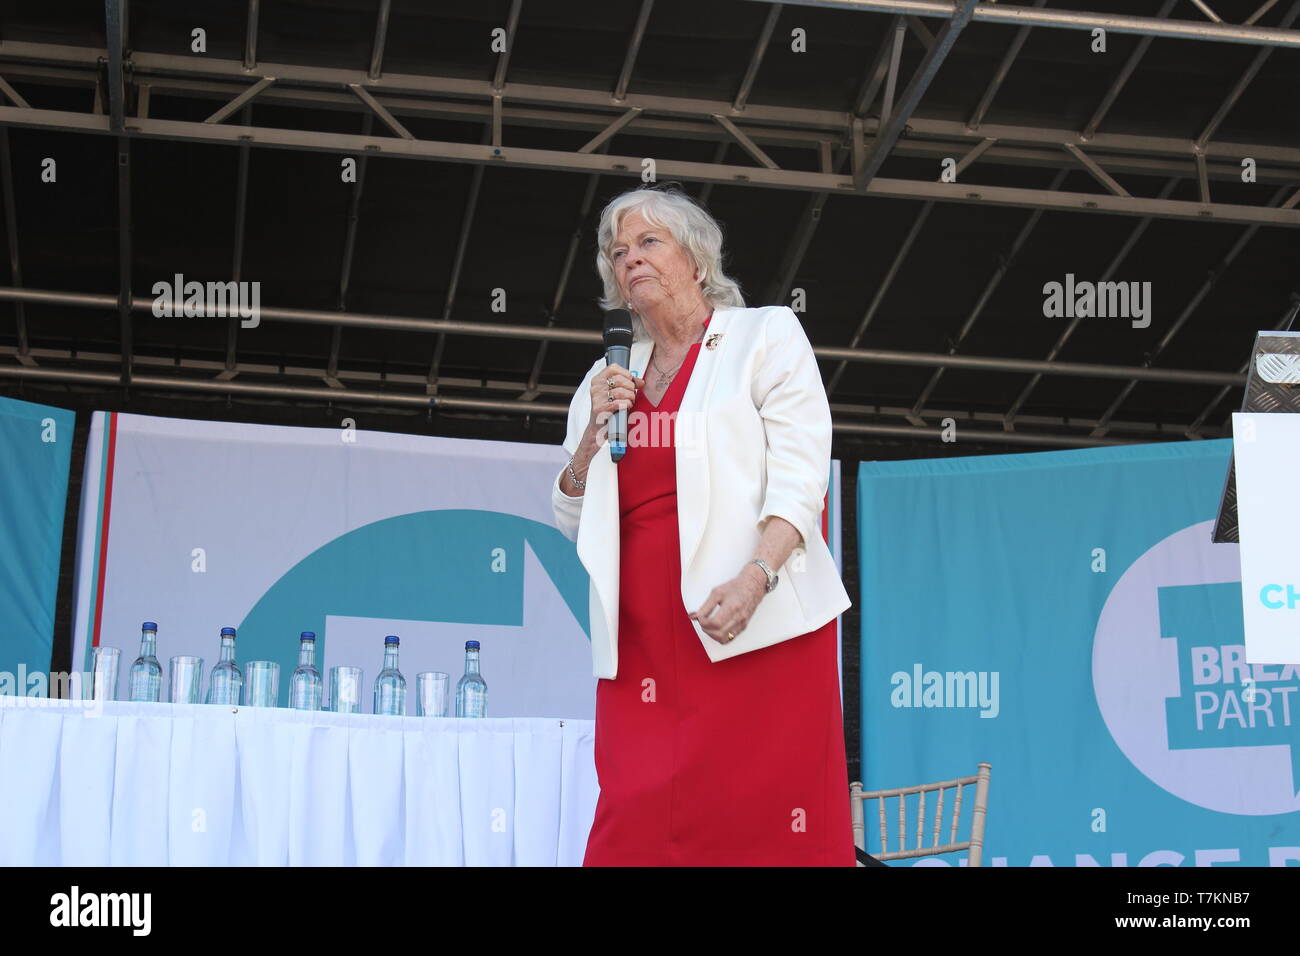 Ann Widdecombe speaking at the Brexit party rally in Chester, the event was attended by around 350 people Stock Photo